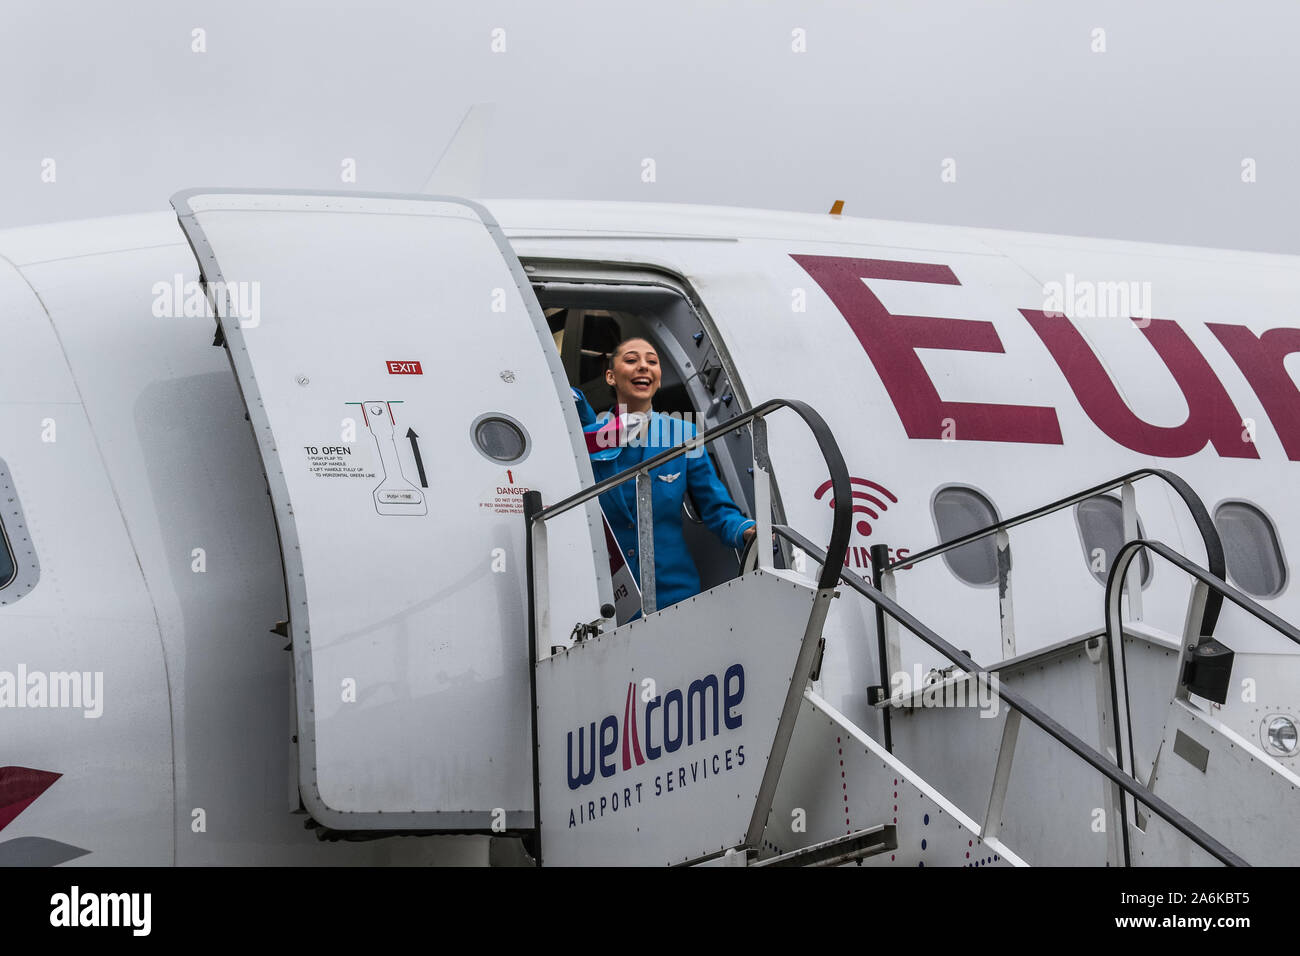 Gdansk, Poland 27th, Oct. 2019 Eurowings (Lufthansa group) Airbus A319-132 (reg. No. D-AGWU) stewardess at Gdansk Lech Walesa Rebiechowo GDN airport is seen in Gdansk, Poland on 27 October 2019  Eurowings lines inaugurated Gdansk - Dusseldorf (Germany) route, and will operate on  it 4 times weekly. © Vadim Pacajev / Alamy Live News Stock Photo